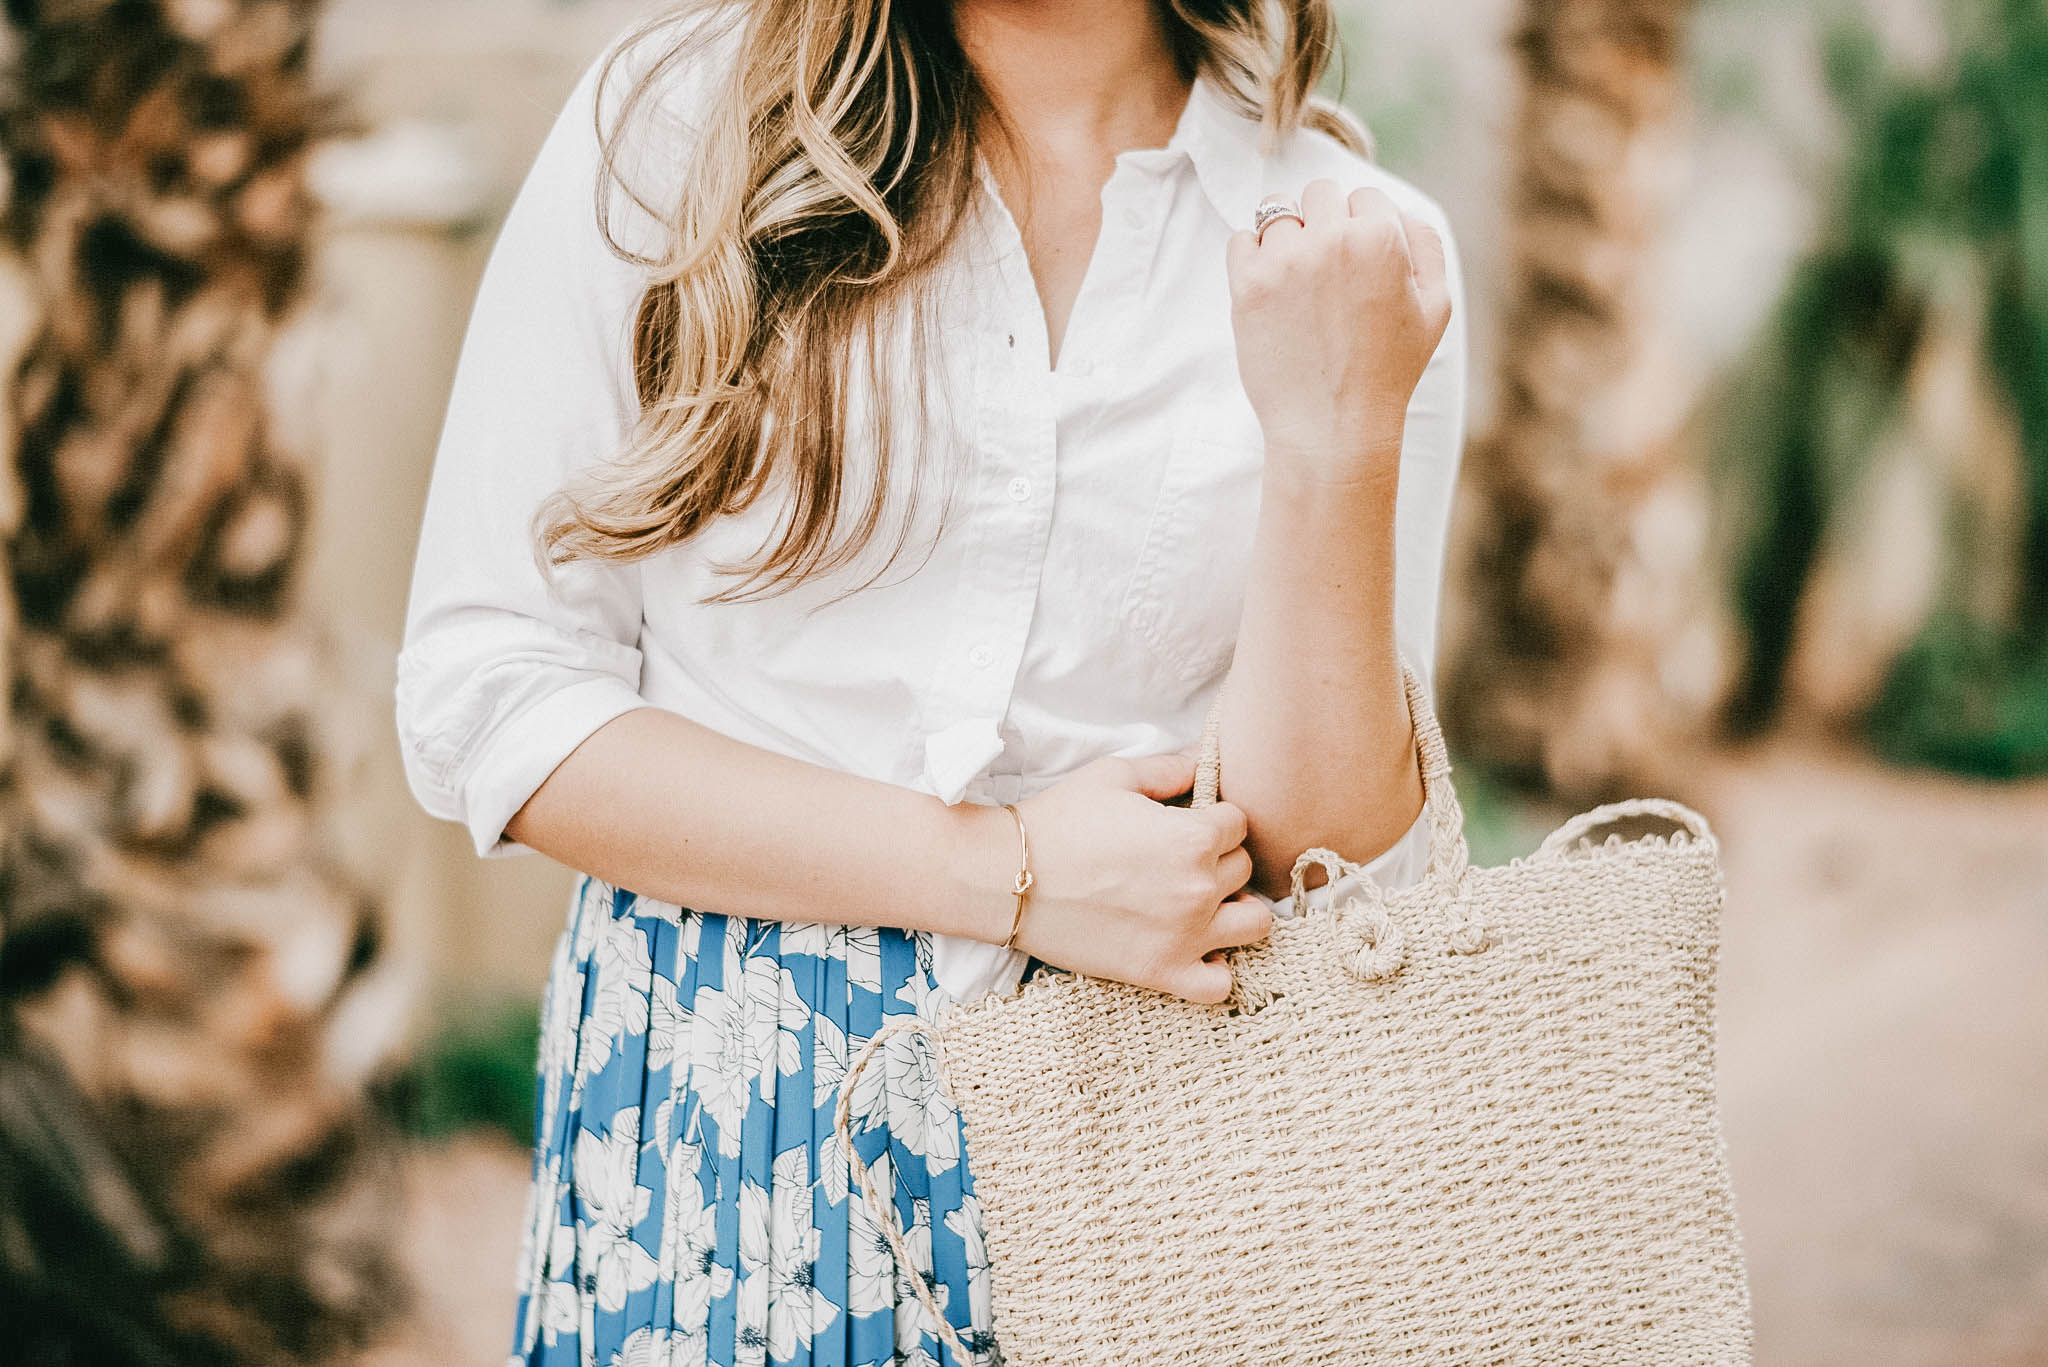 Personal Style Uniform | White Button Up